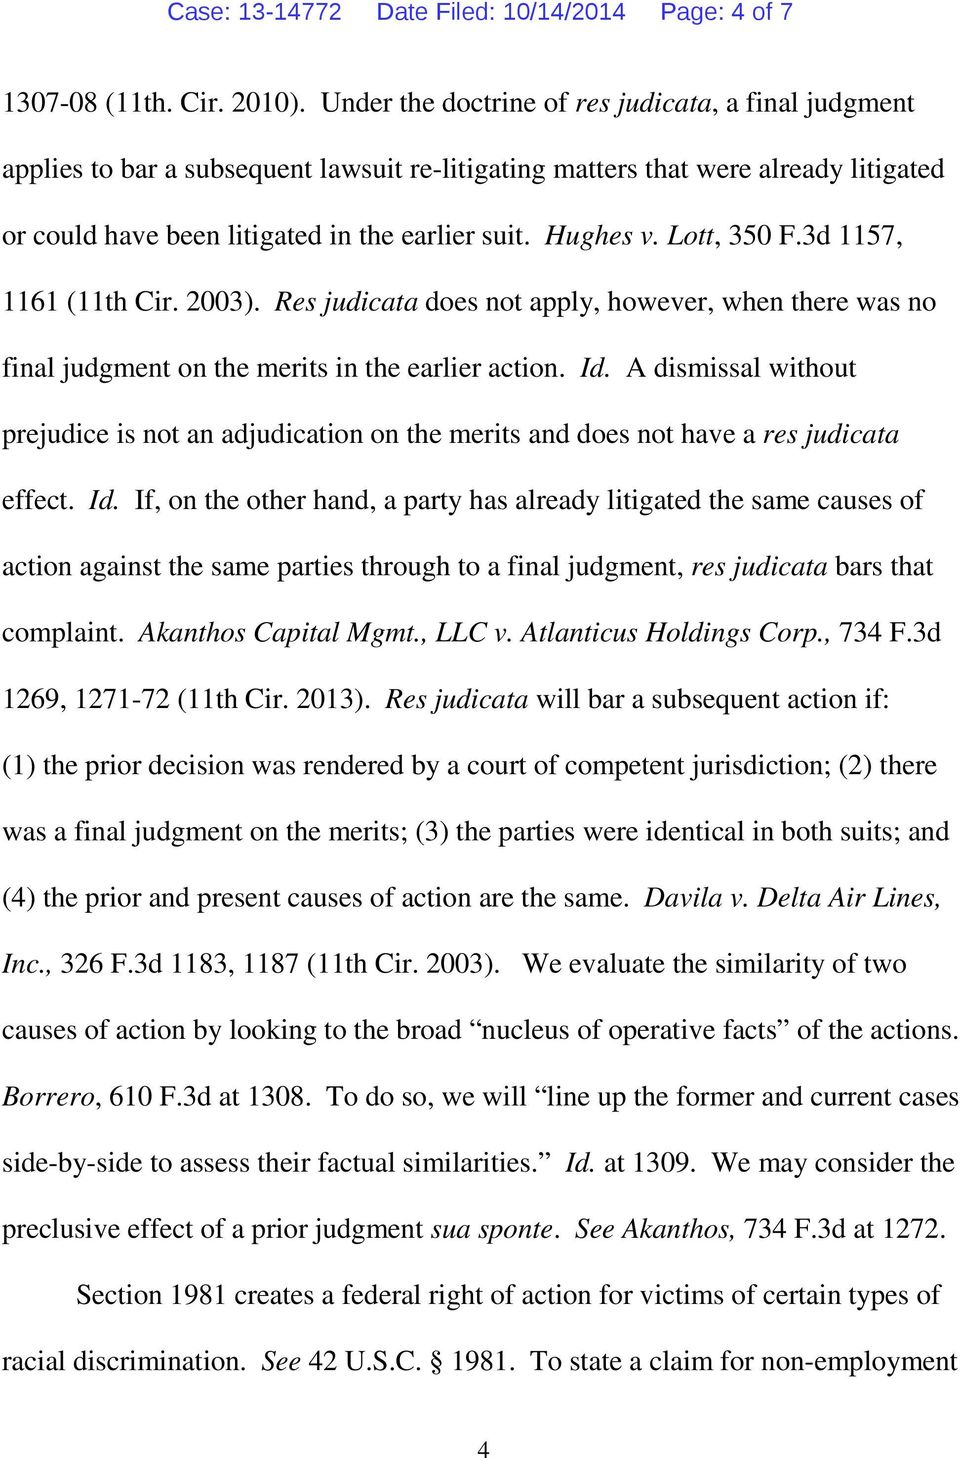 Lott, 350 F.3d 1157, 1161 (11th Cir. 2003). Res judicata does not apply, however, when there was no final judgment on the merits in the earlier action. Id.